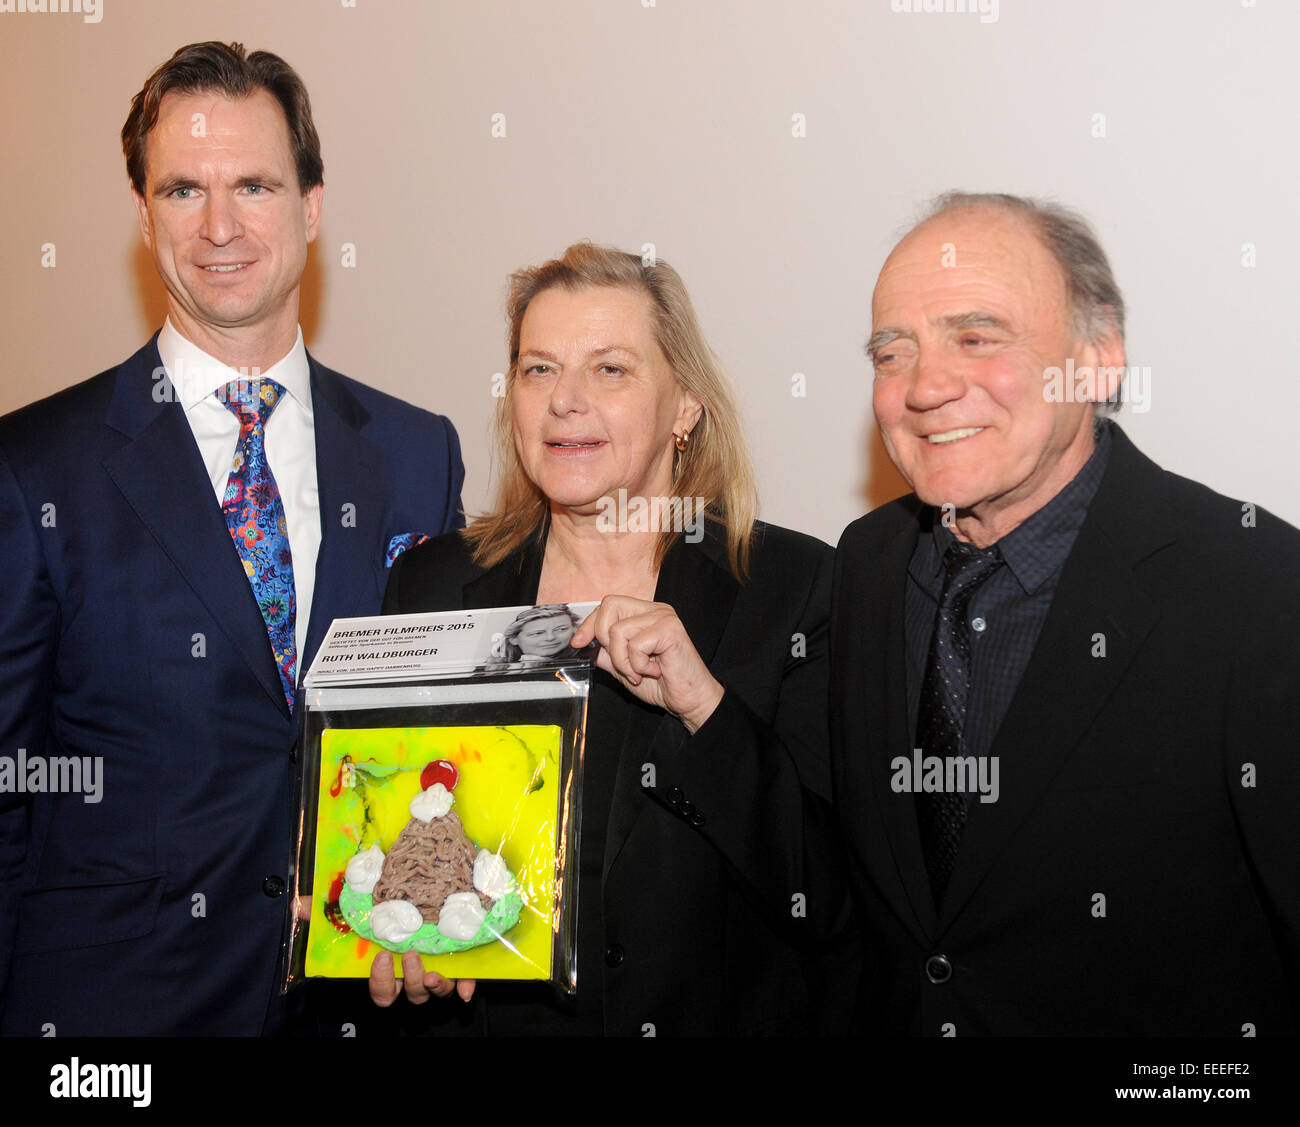 Bremen, Germany. 15th Jan, 2015. Swiss actor and eulogist of the Bremen Film Prize award, Bruno Ganz (R), the chairman of the board of Sparkasse Bremen, Tim Nesemann (L) and award winner and Swiss producer Ruth Waldburger stand together after the award ceremony for the Bremen Film Prize in the town hall of Bremen, Germany, 15 January 2015. The Bremen Film Prize is endowed with 8,000 euro sponsored by the Sparkasse Bremen Foundation. Bruno Ganz was the first ever awardee to be honoured with the Bremen Film Prize. Photo: Ingo Wagner/dpa/Alamy Live News Stock Photo